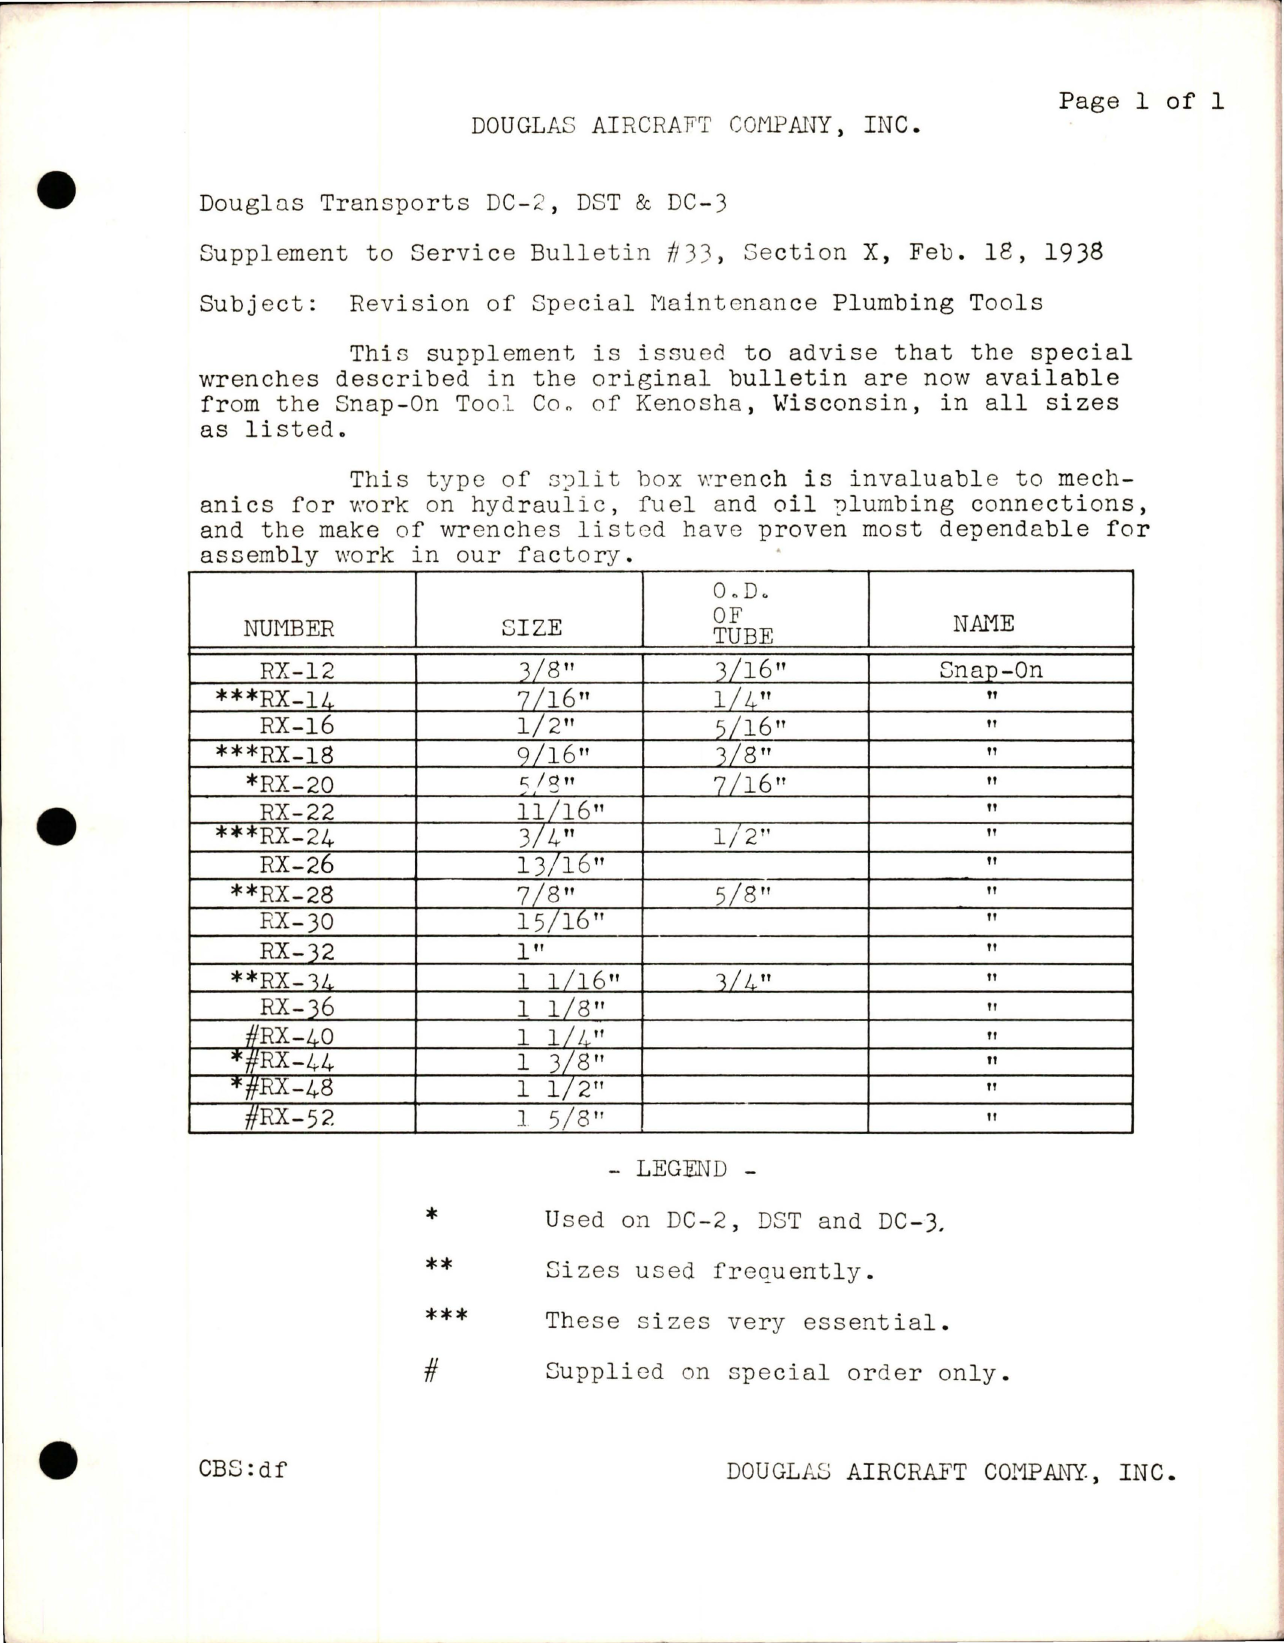 Sample page 1 from AirCorps Library document: Revision of Special Maintenance Plumbing Tools